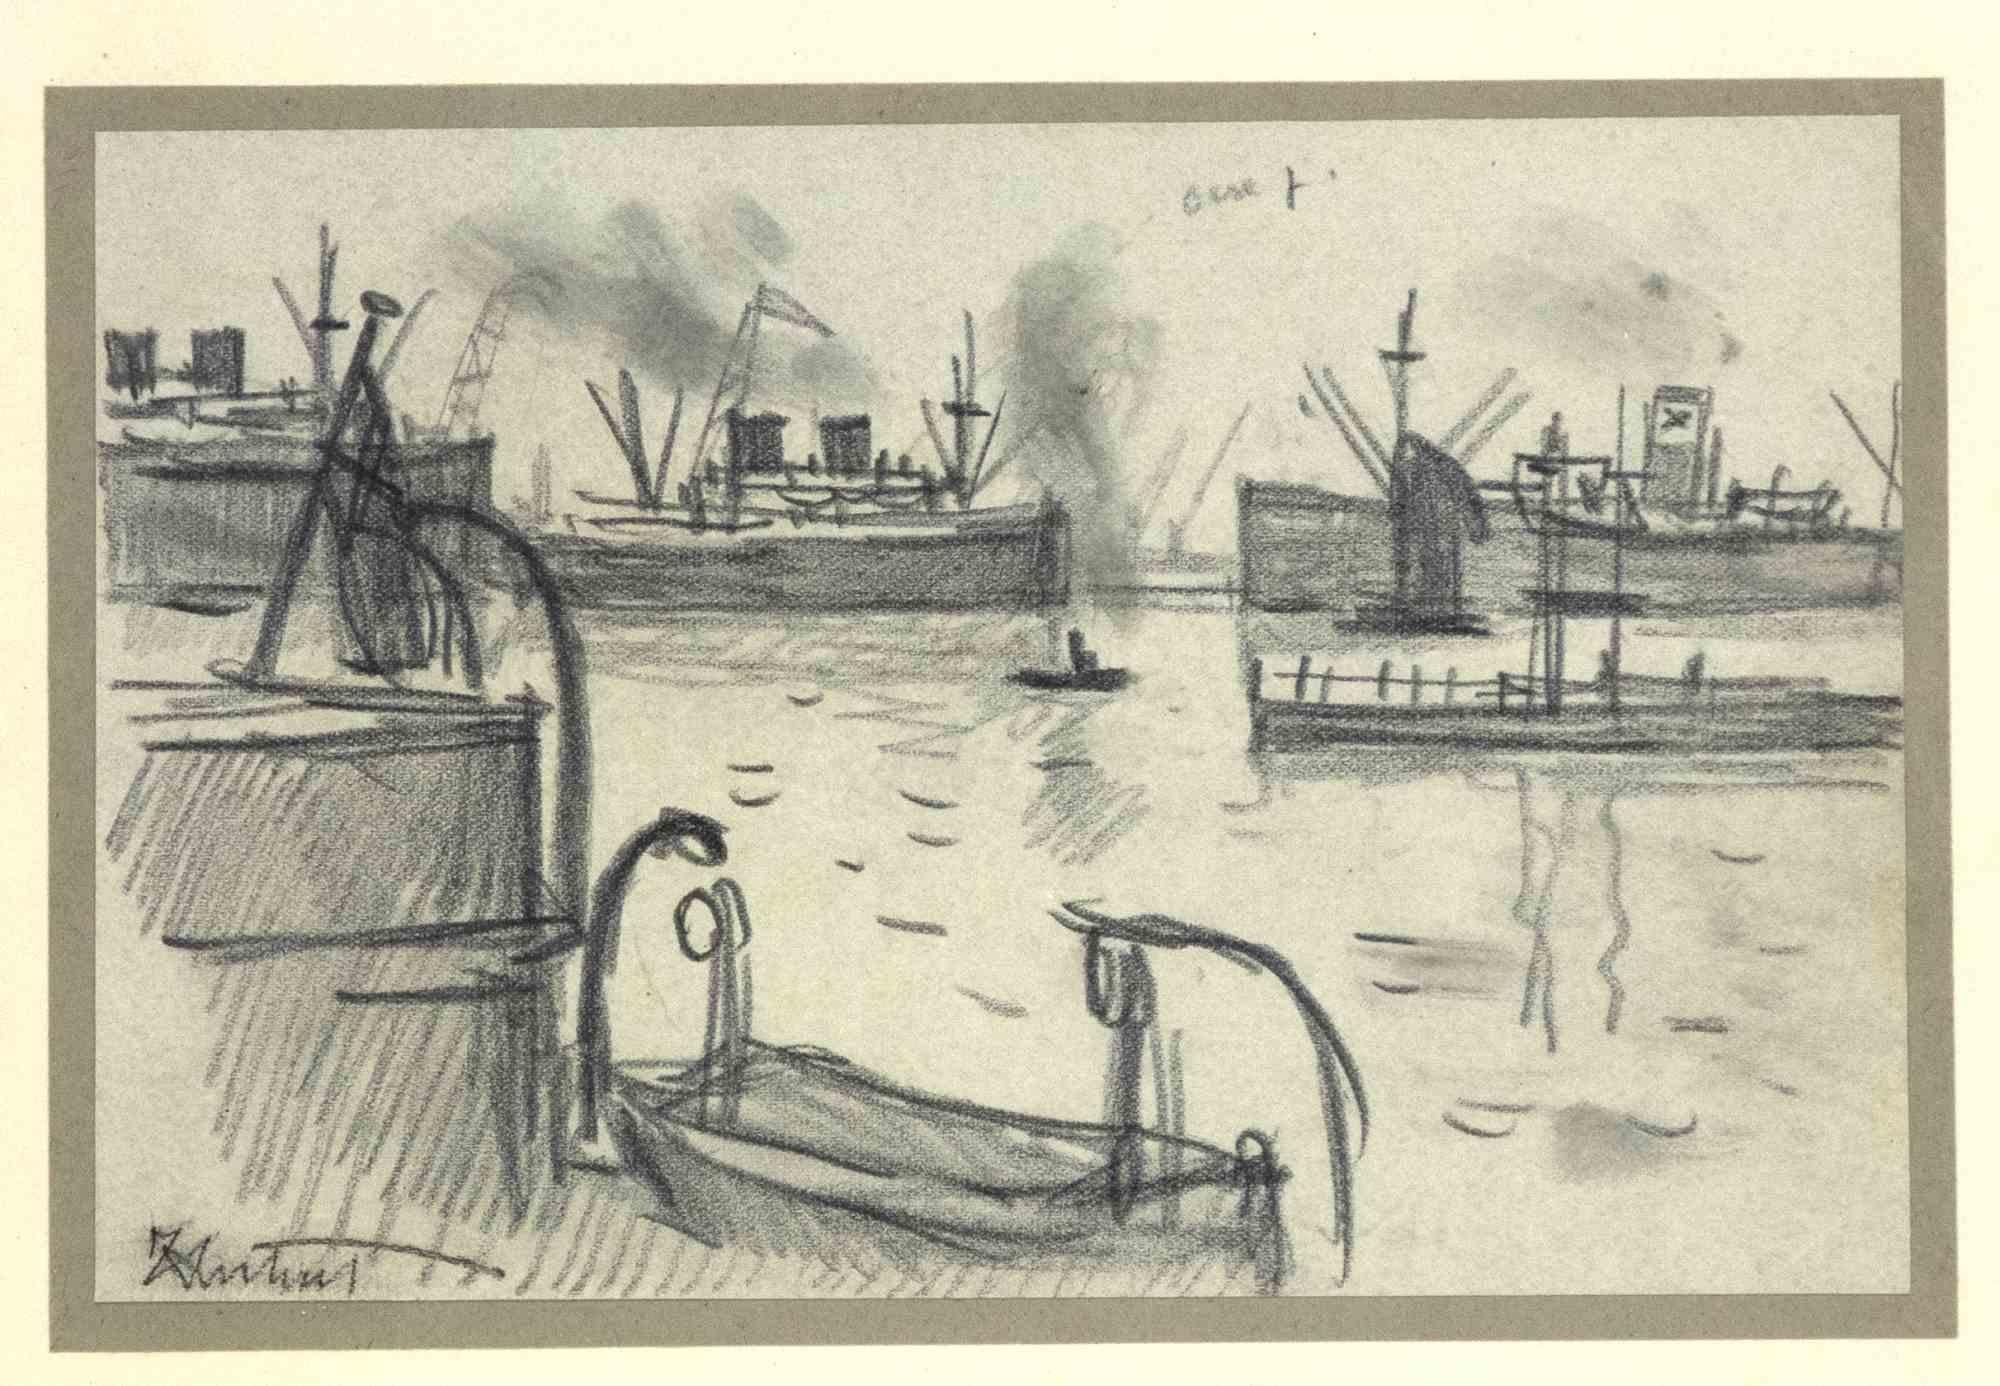 Robert Louis Antral Landscape Art - The Harbor in London -  Drawing by R. L. Antral - Early 20th Century